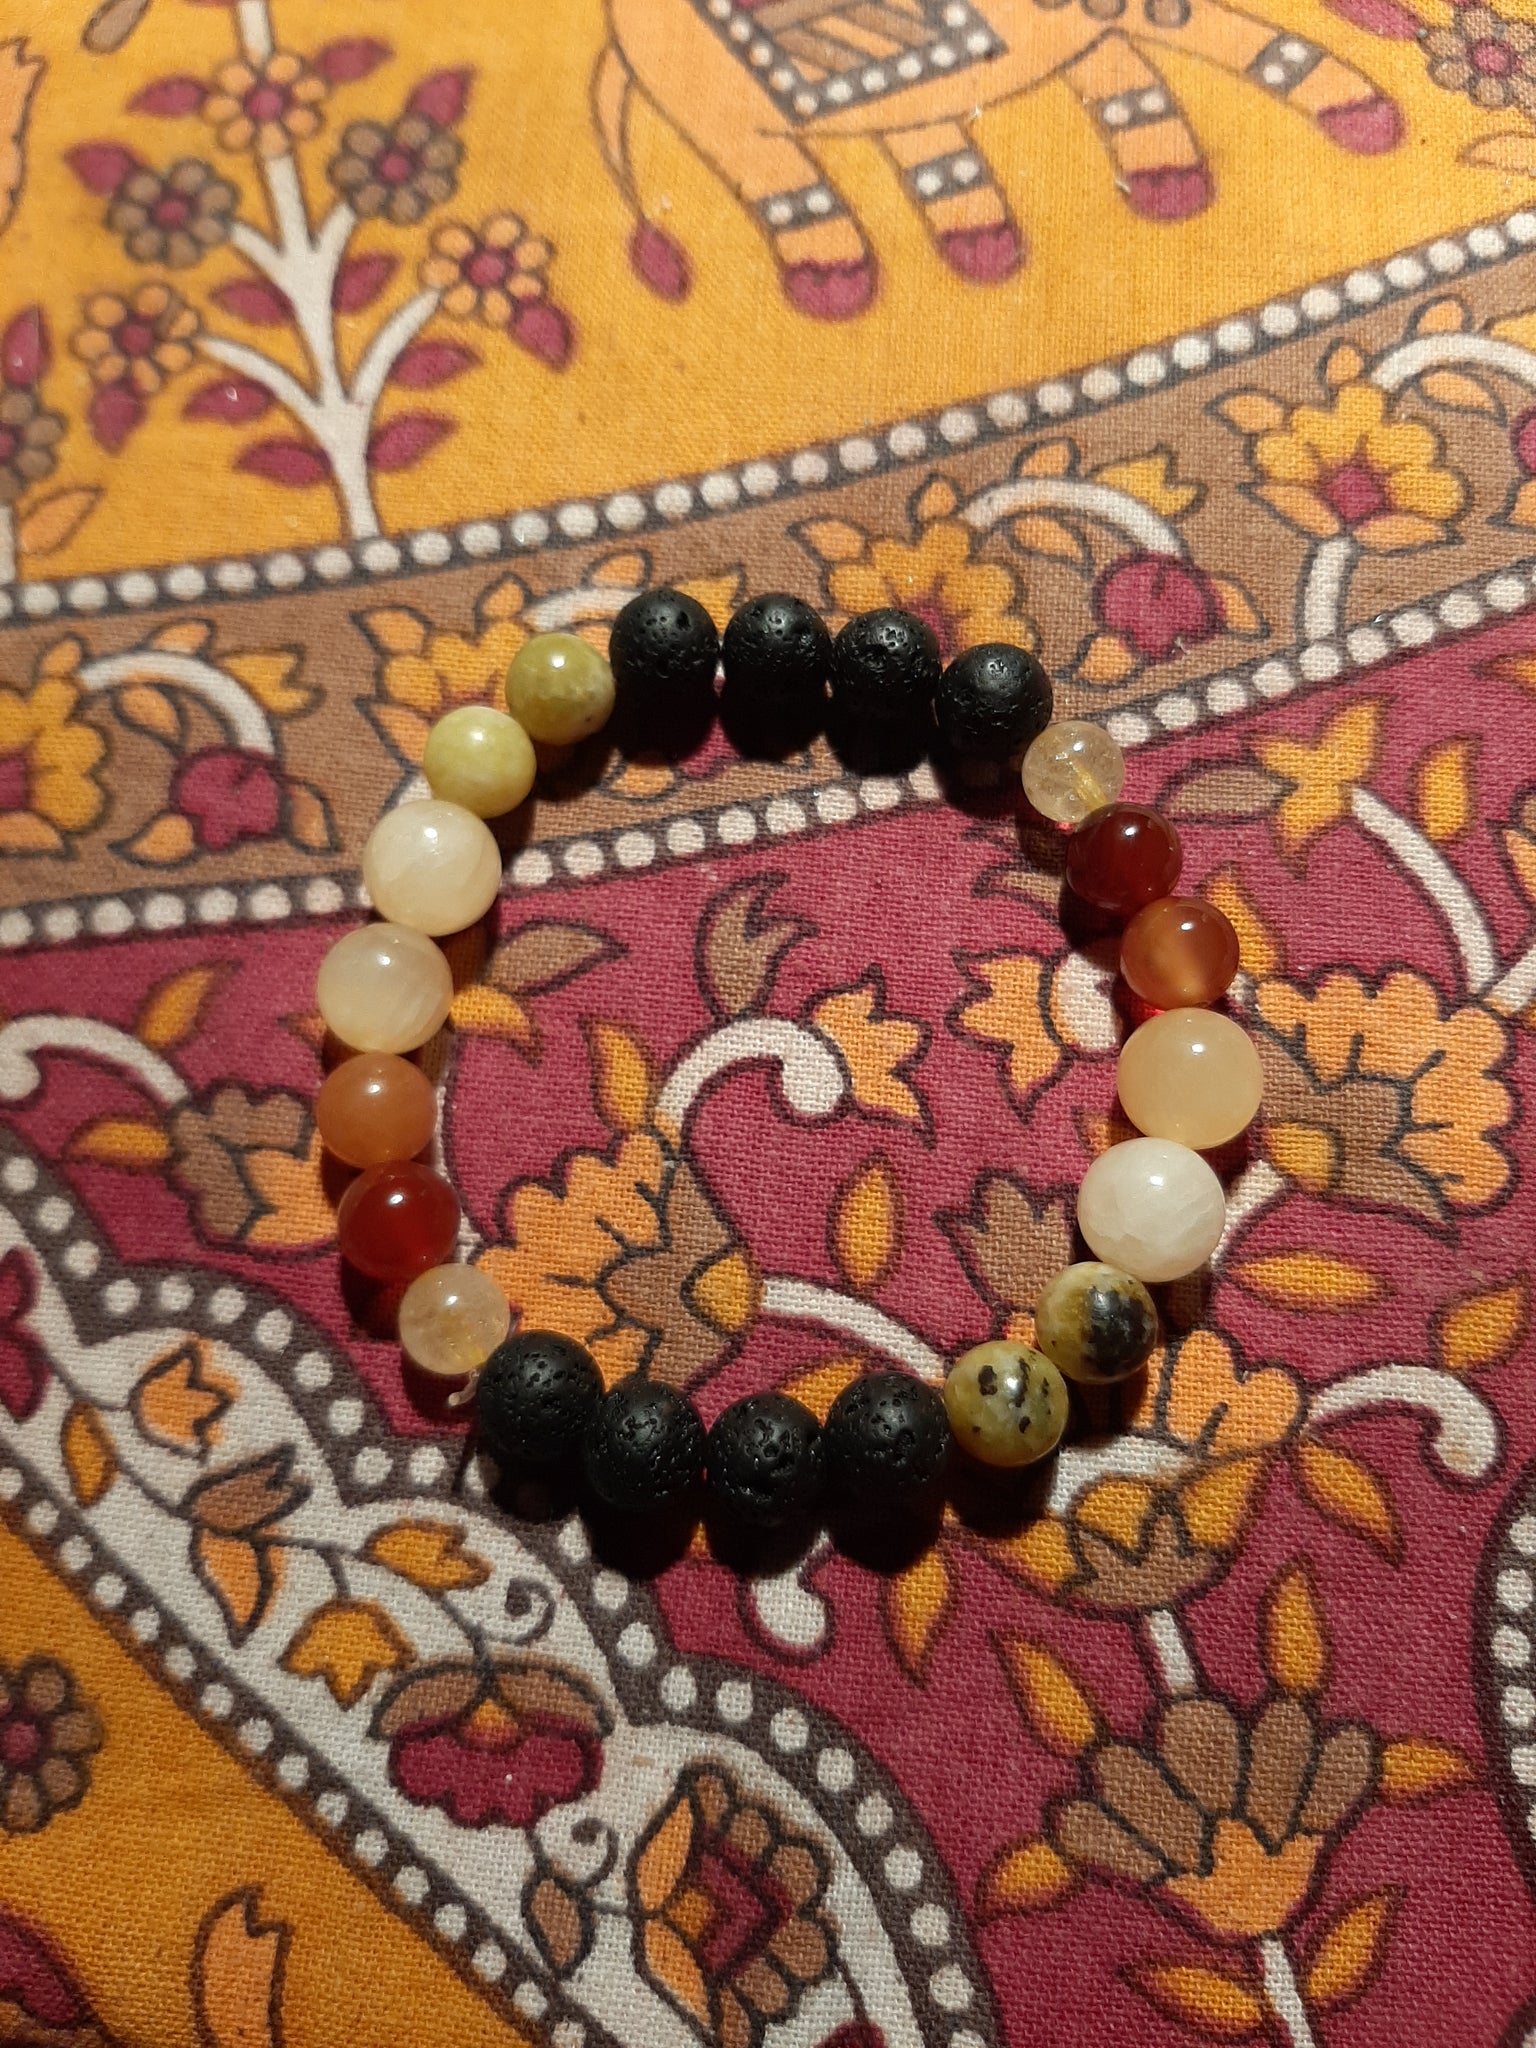 Crystal Bracelets for specific purposes